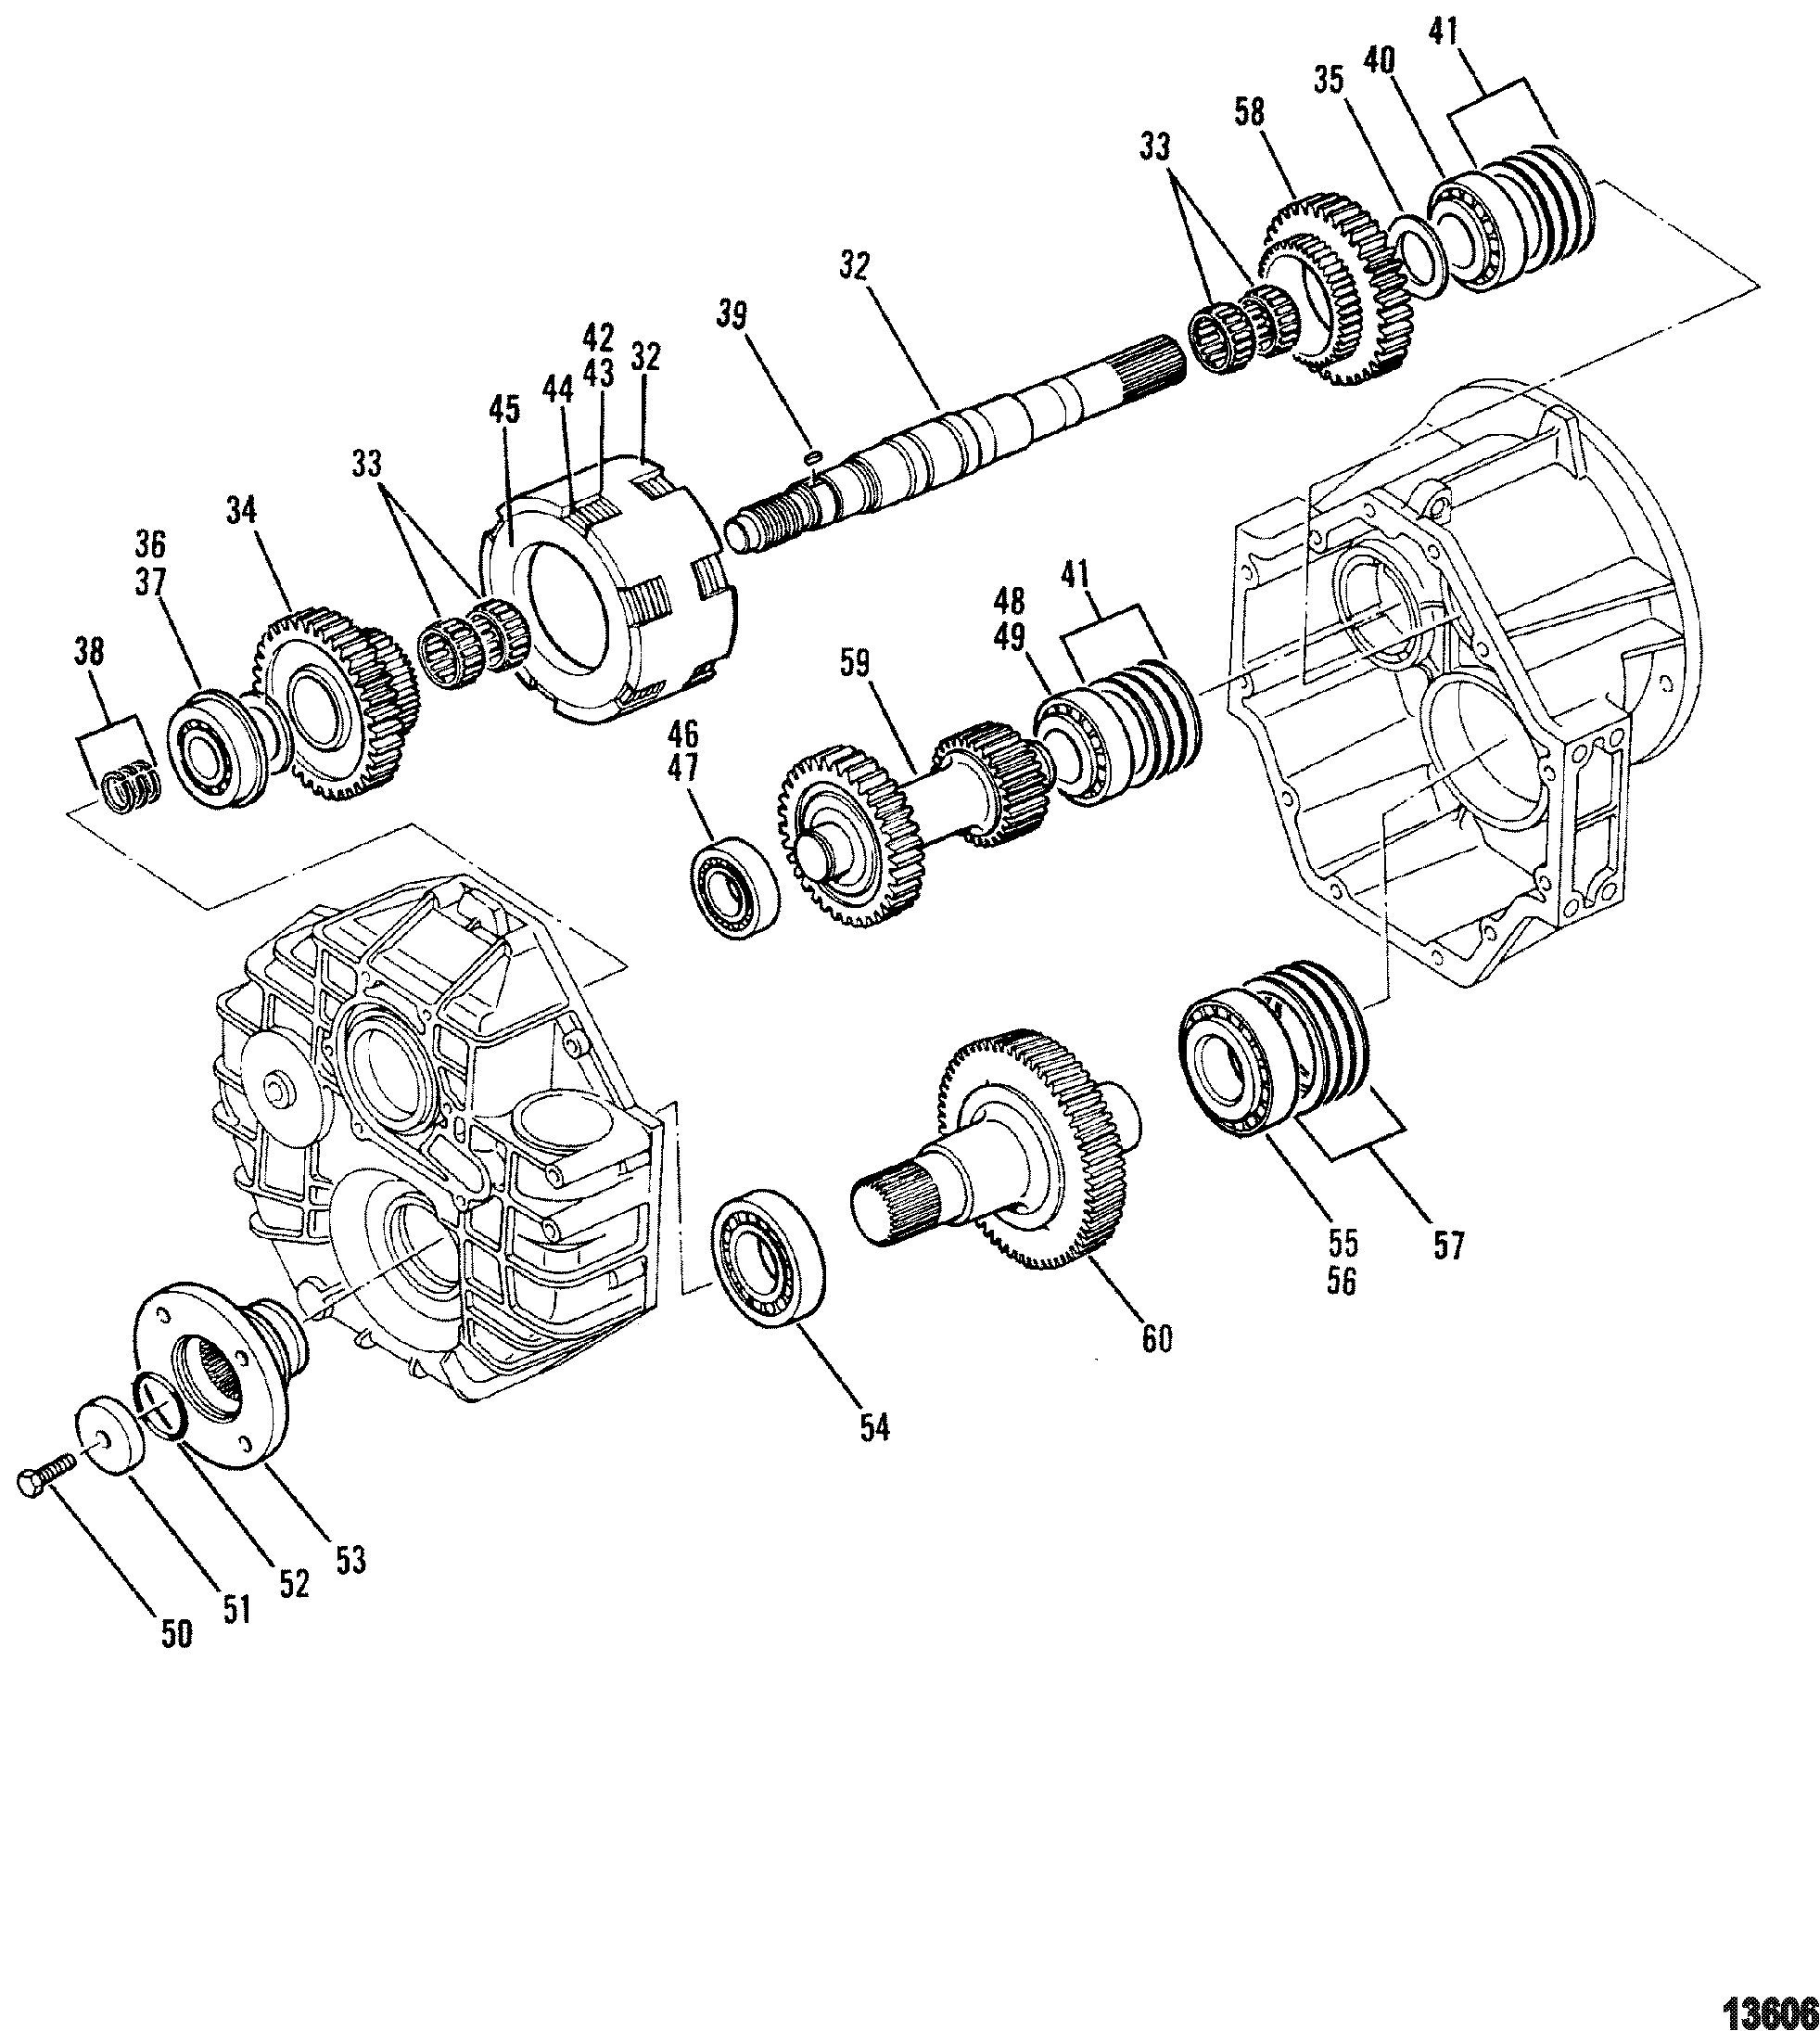 Transmission Assembly(Hydraulic Transmission) Continued